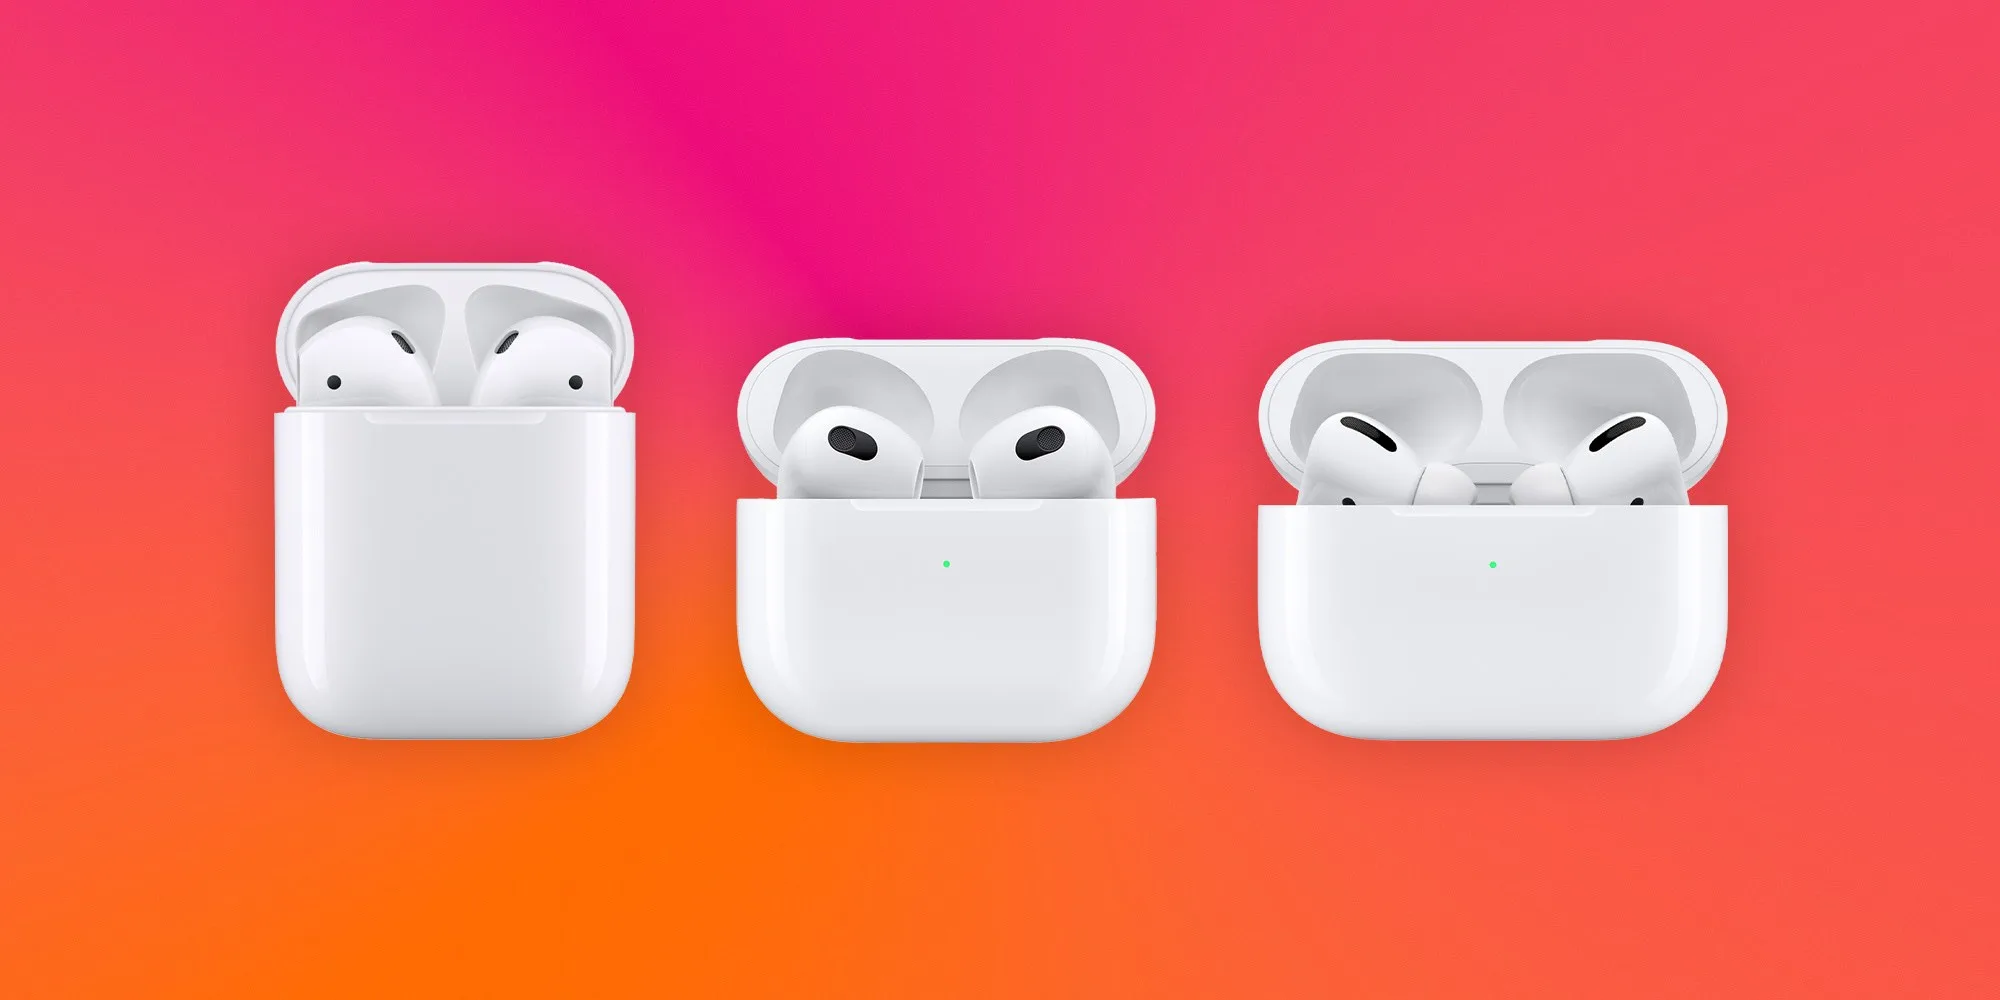 Can you buy a single AirPod